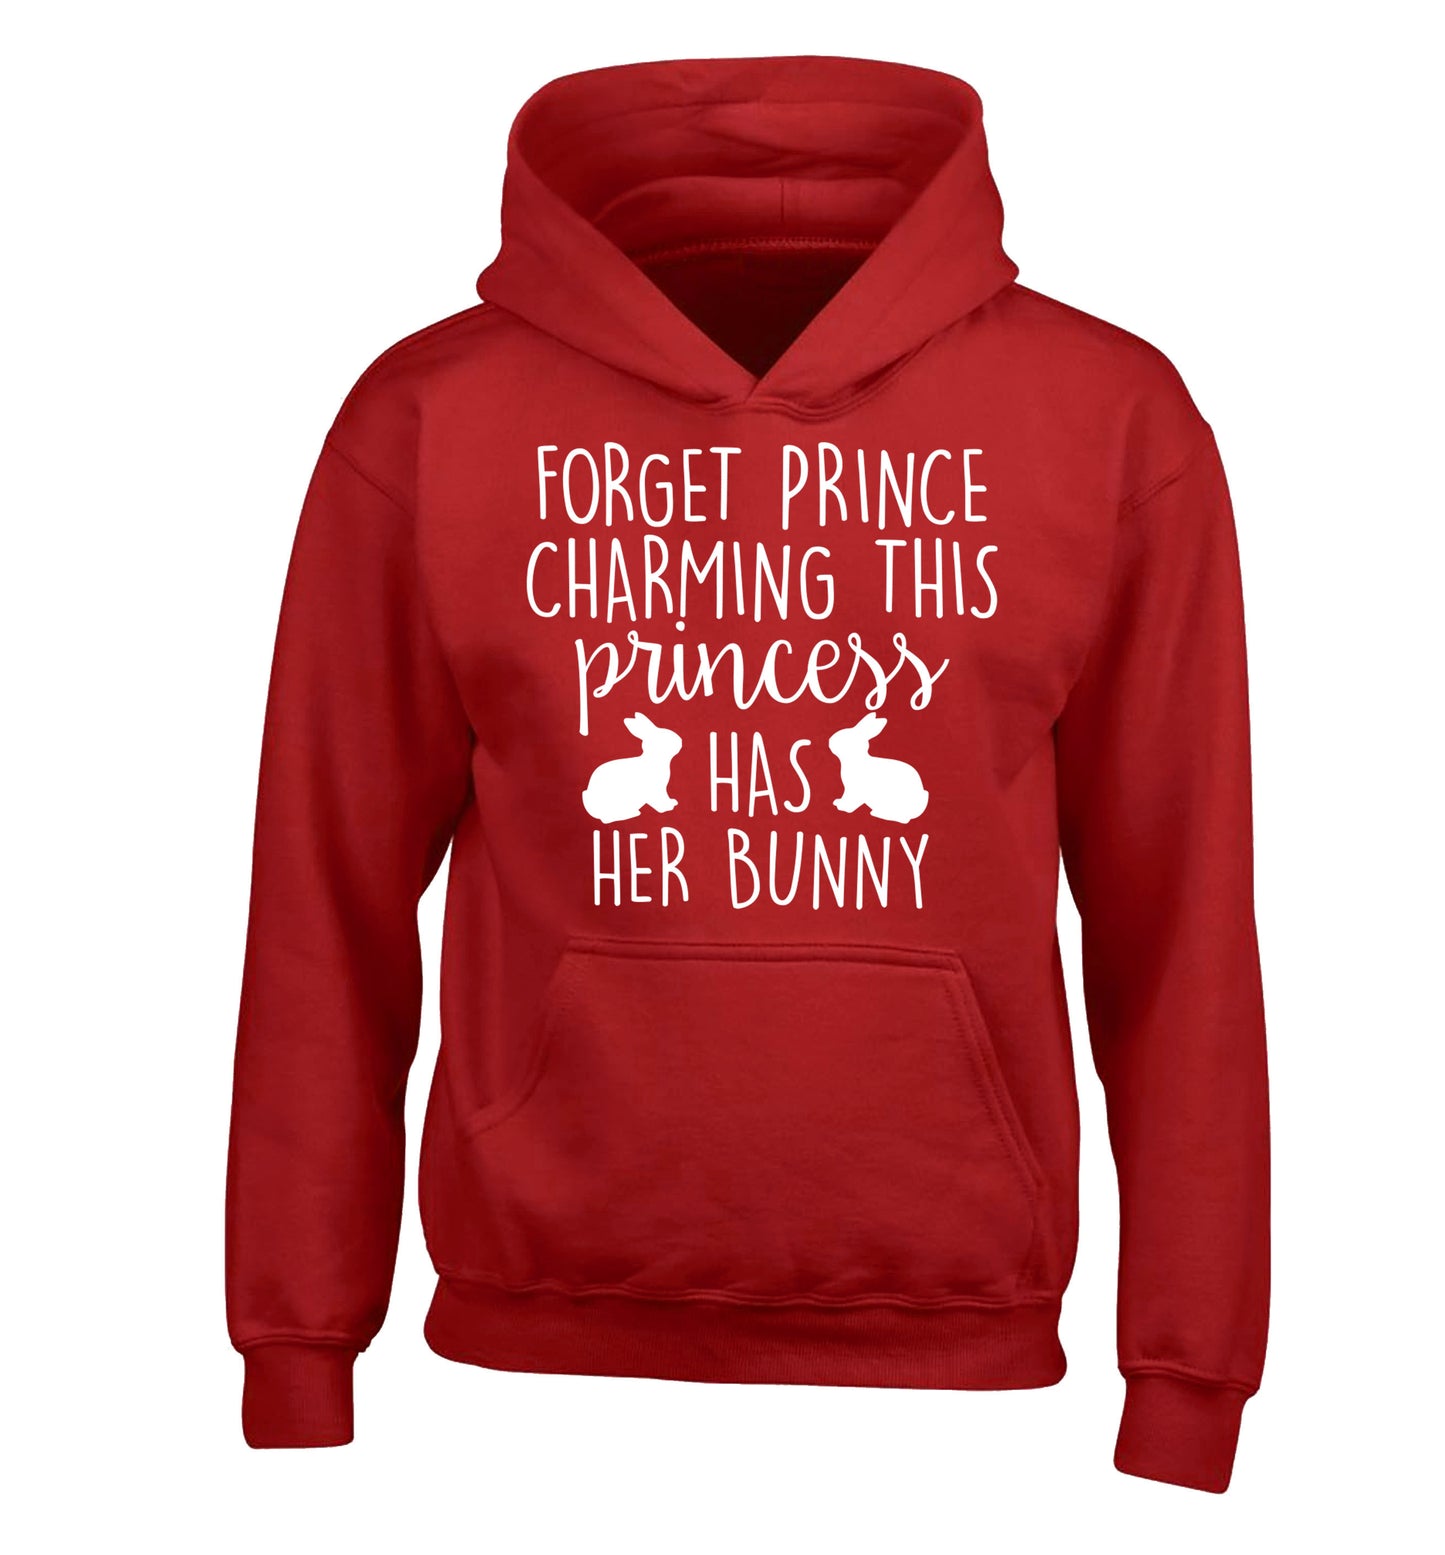 Forget prince charming this princess has her bunny children's red hoodie 12-14 Years